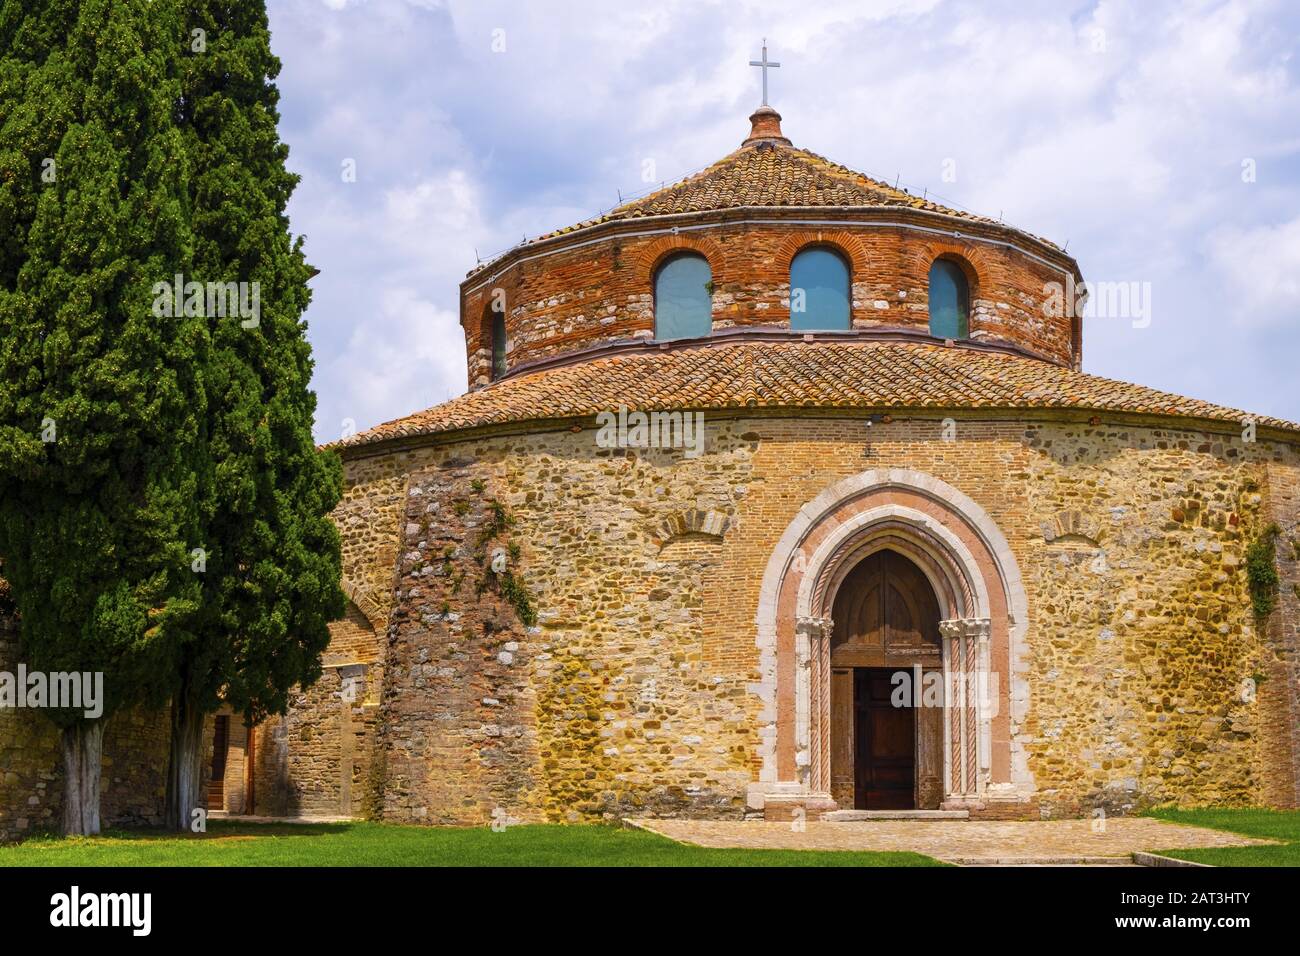 Perugia, Umbria / Italy - 2018/05/28: V century Early Christianity St. Michel Archangel Church - Chiesa di San Michele Arcangelo in Perugia historic quarter Stock Photo